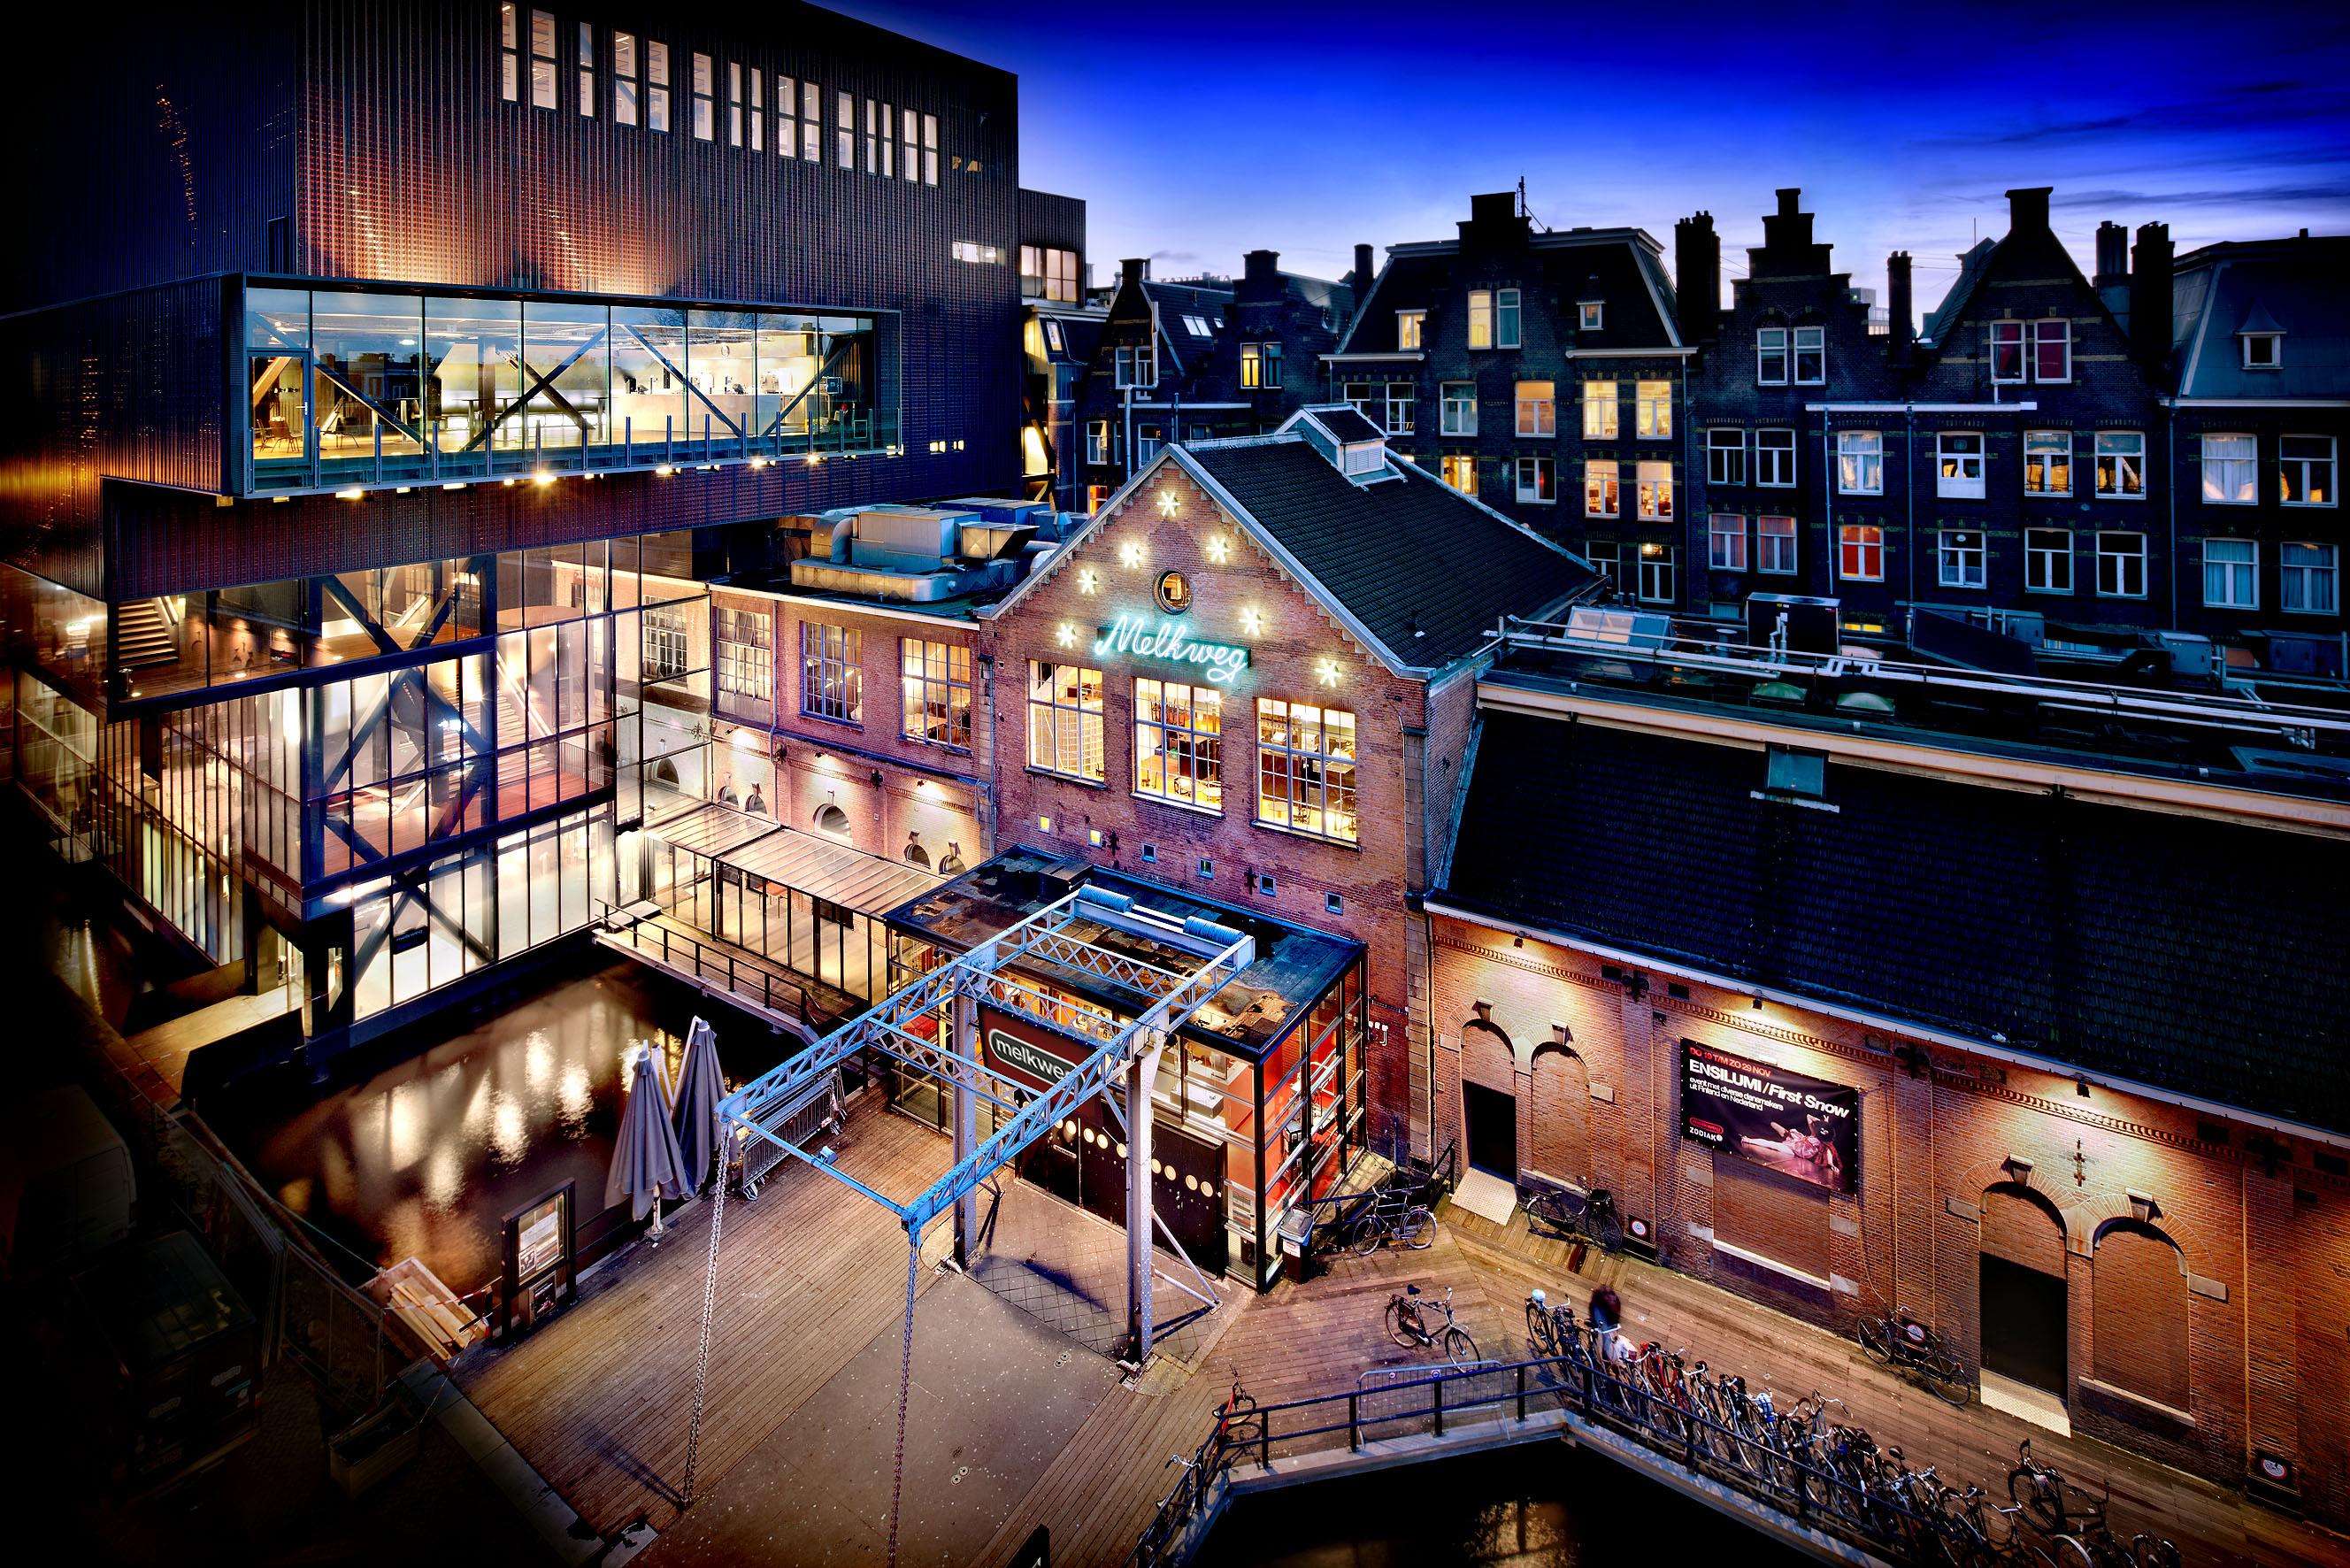 Cover image of this place Melkweg